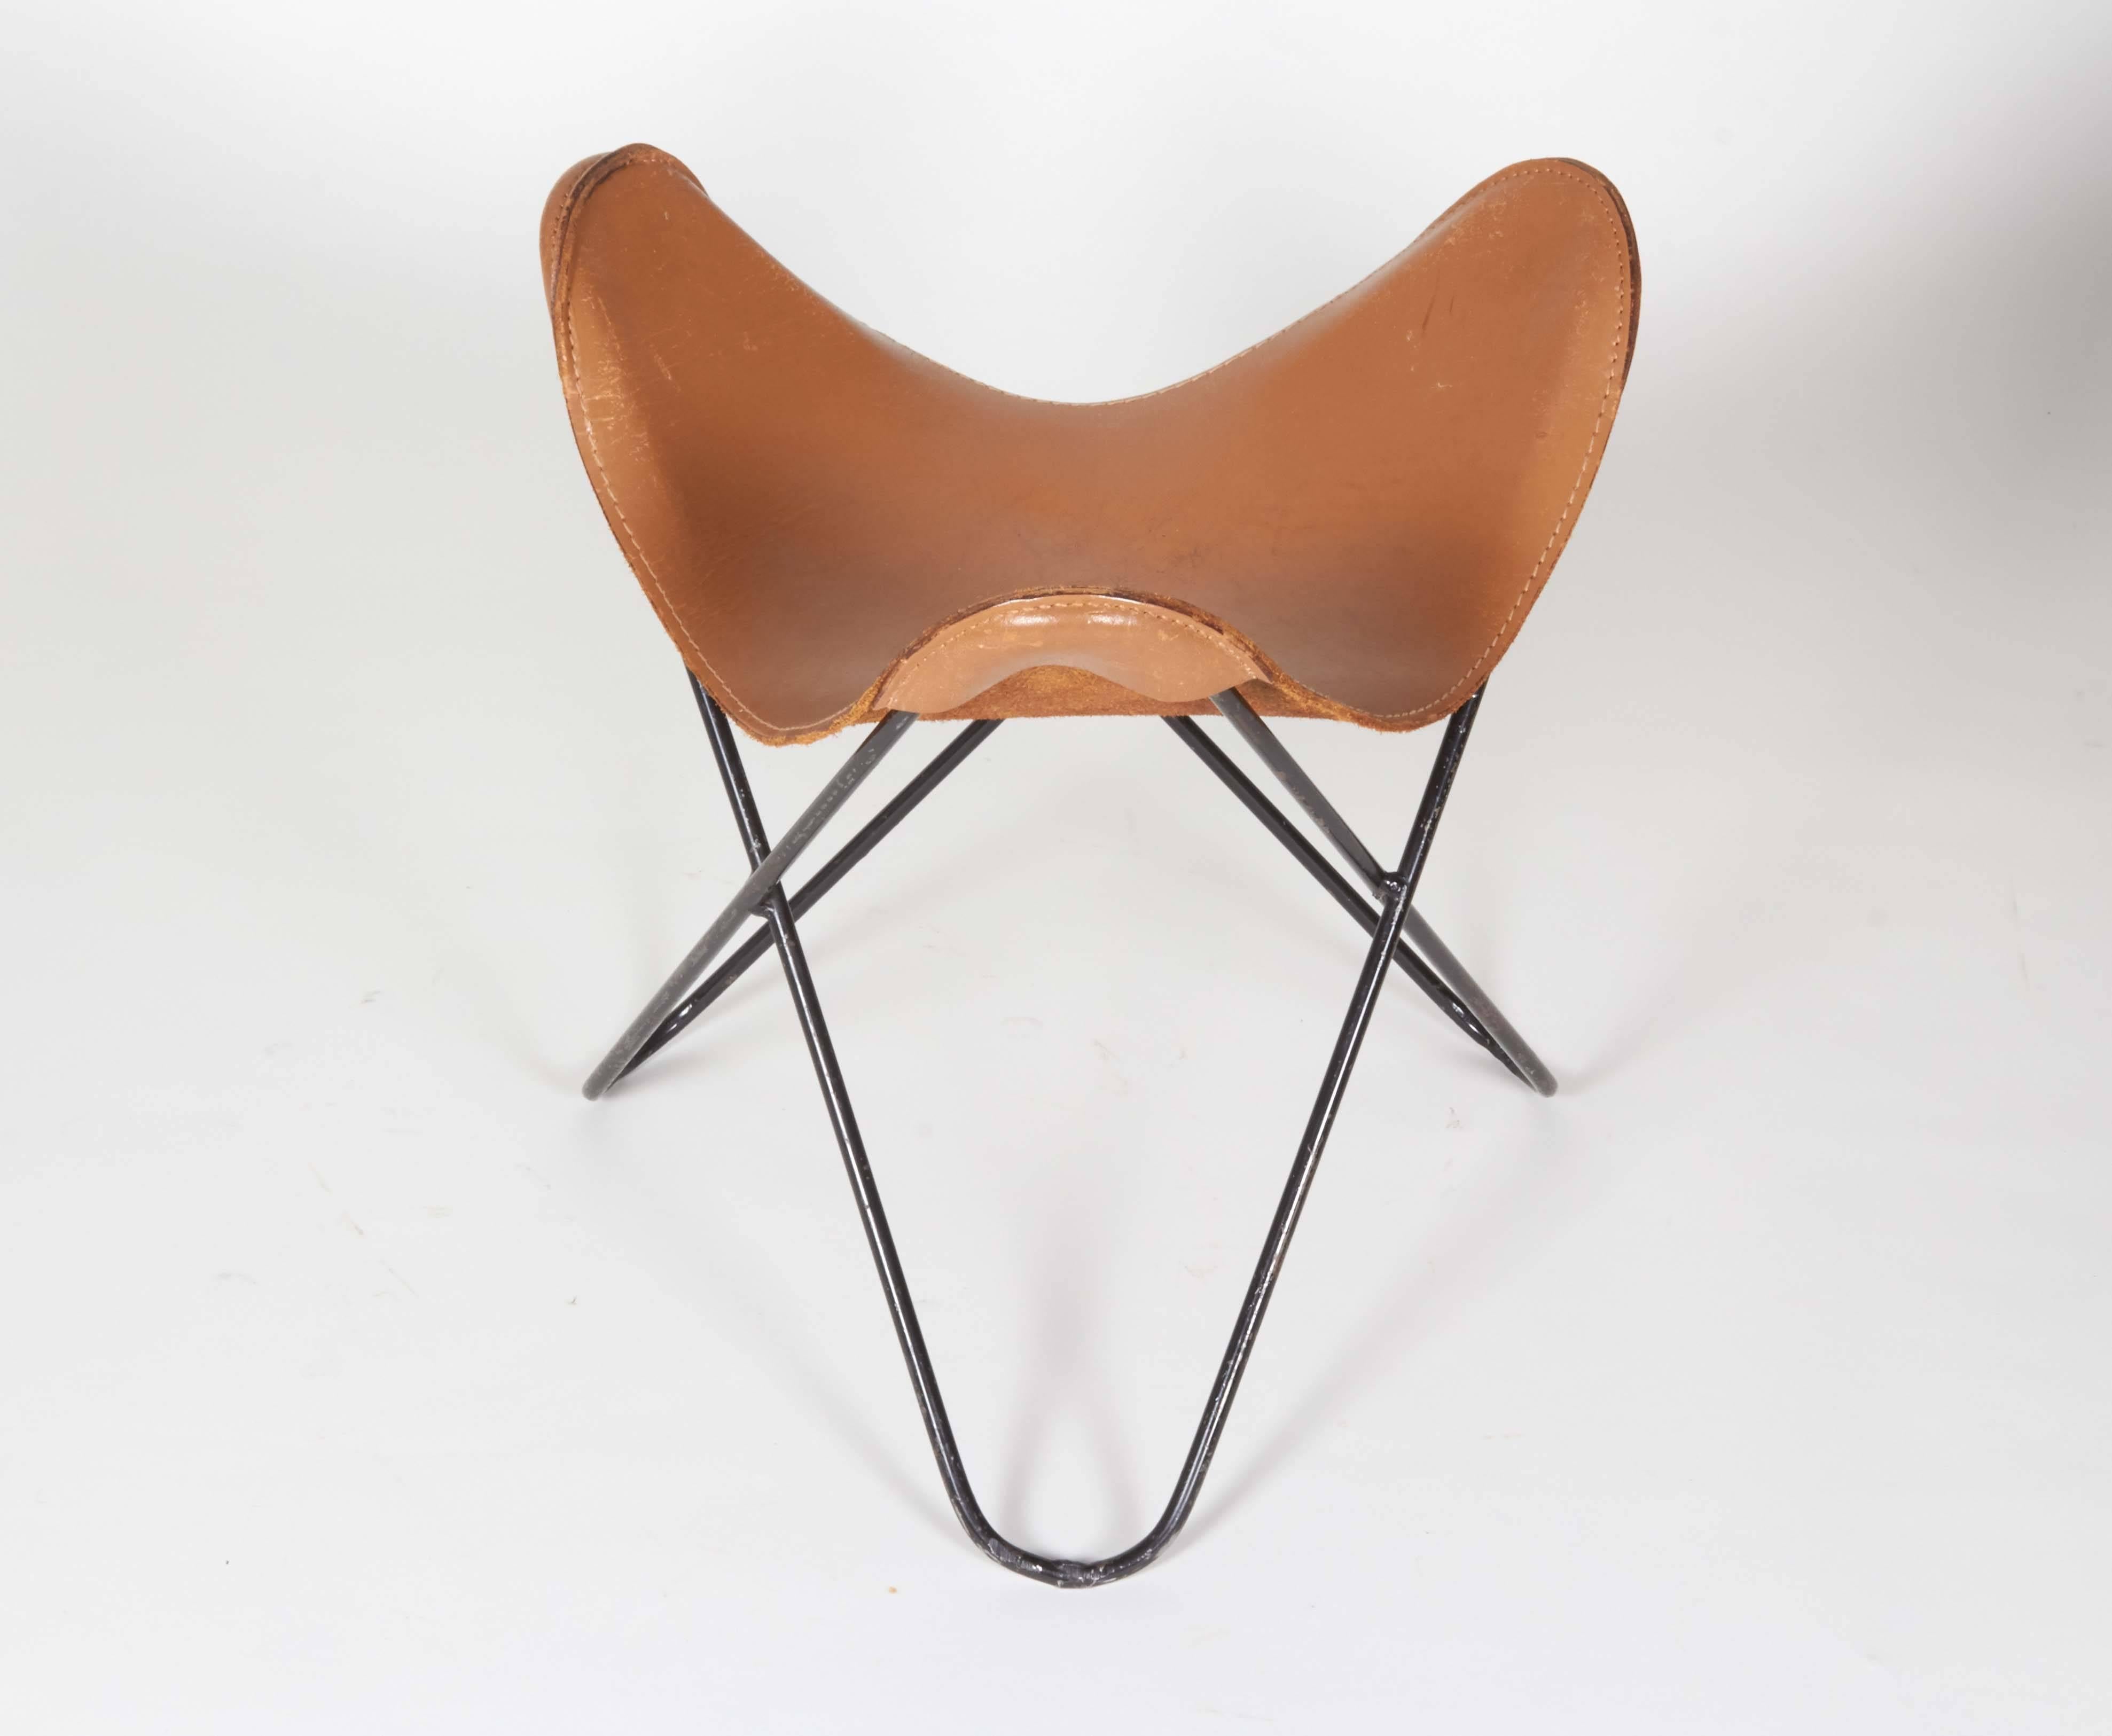 A rare find that complements the iconic butterfly chair by Hardoy.